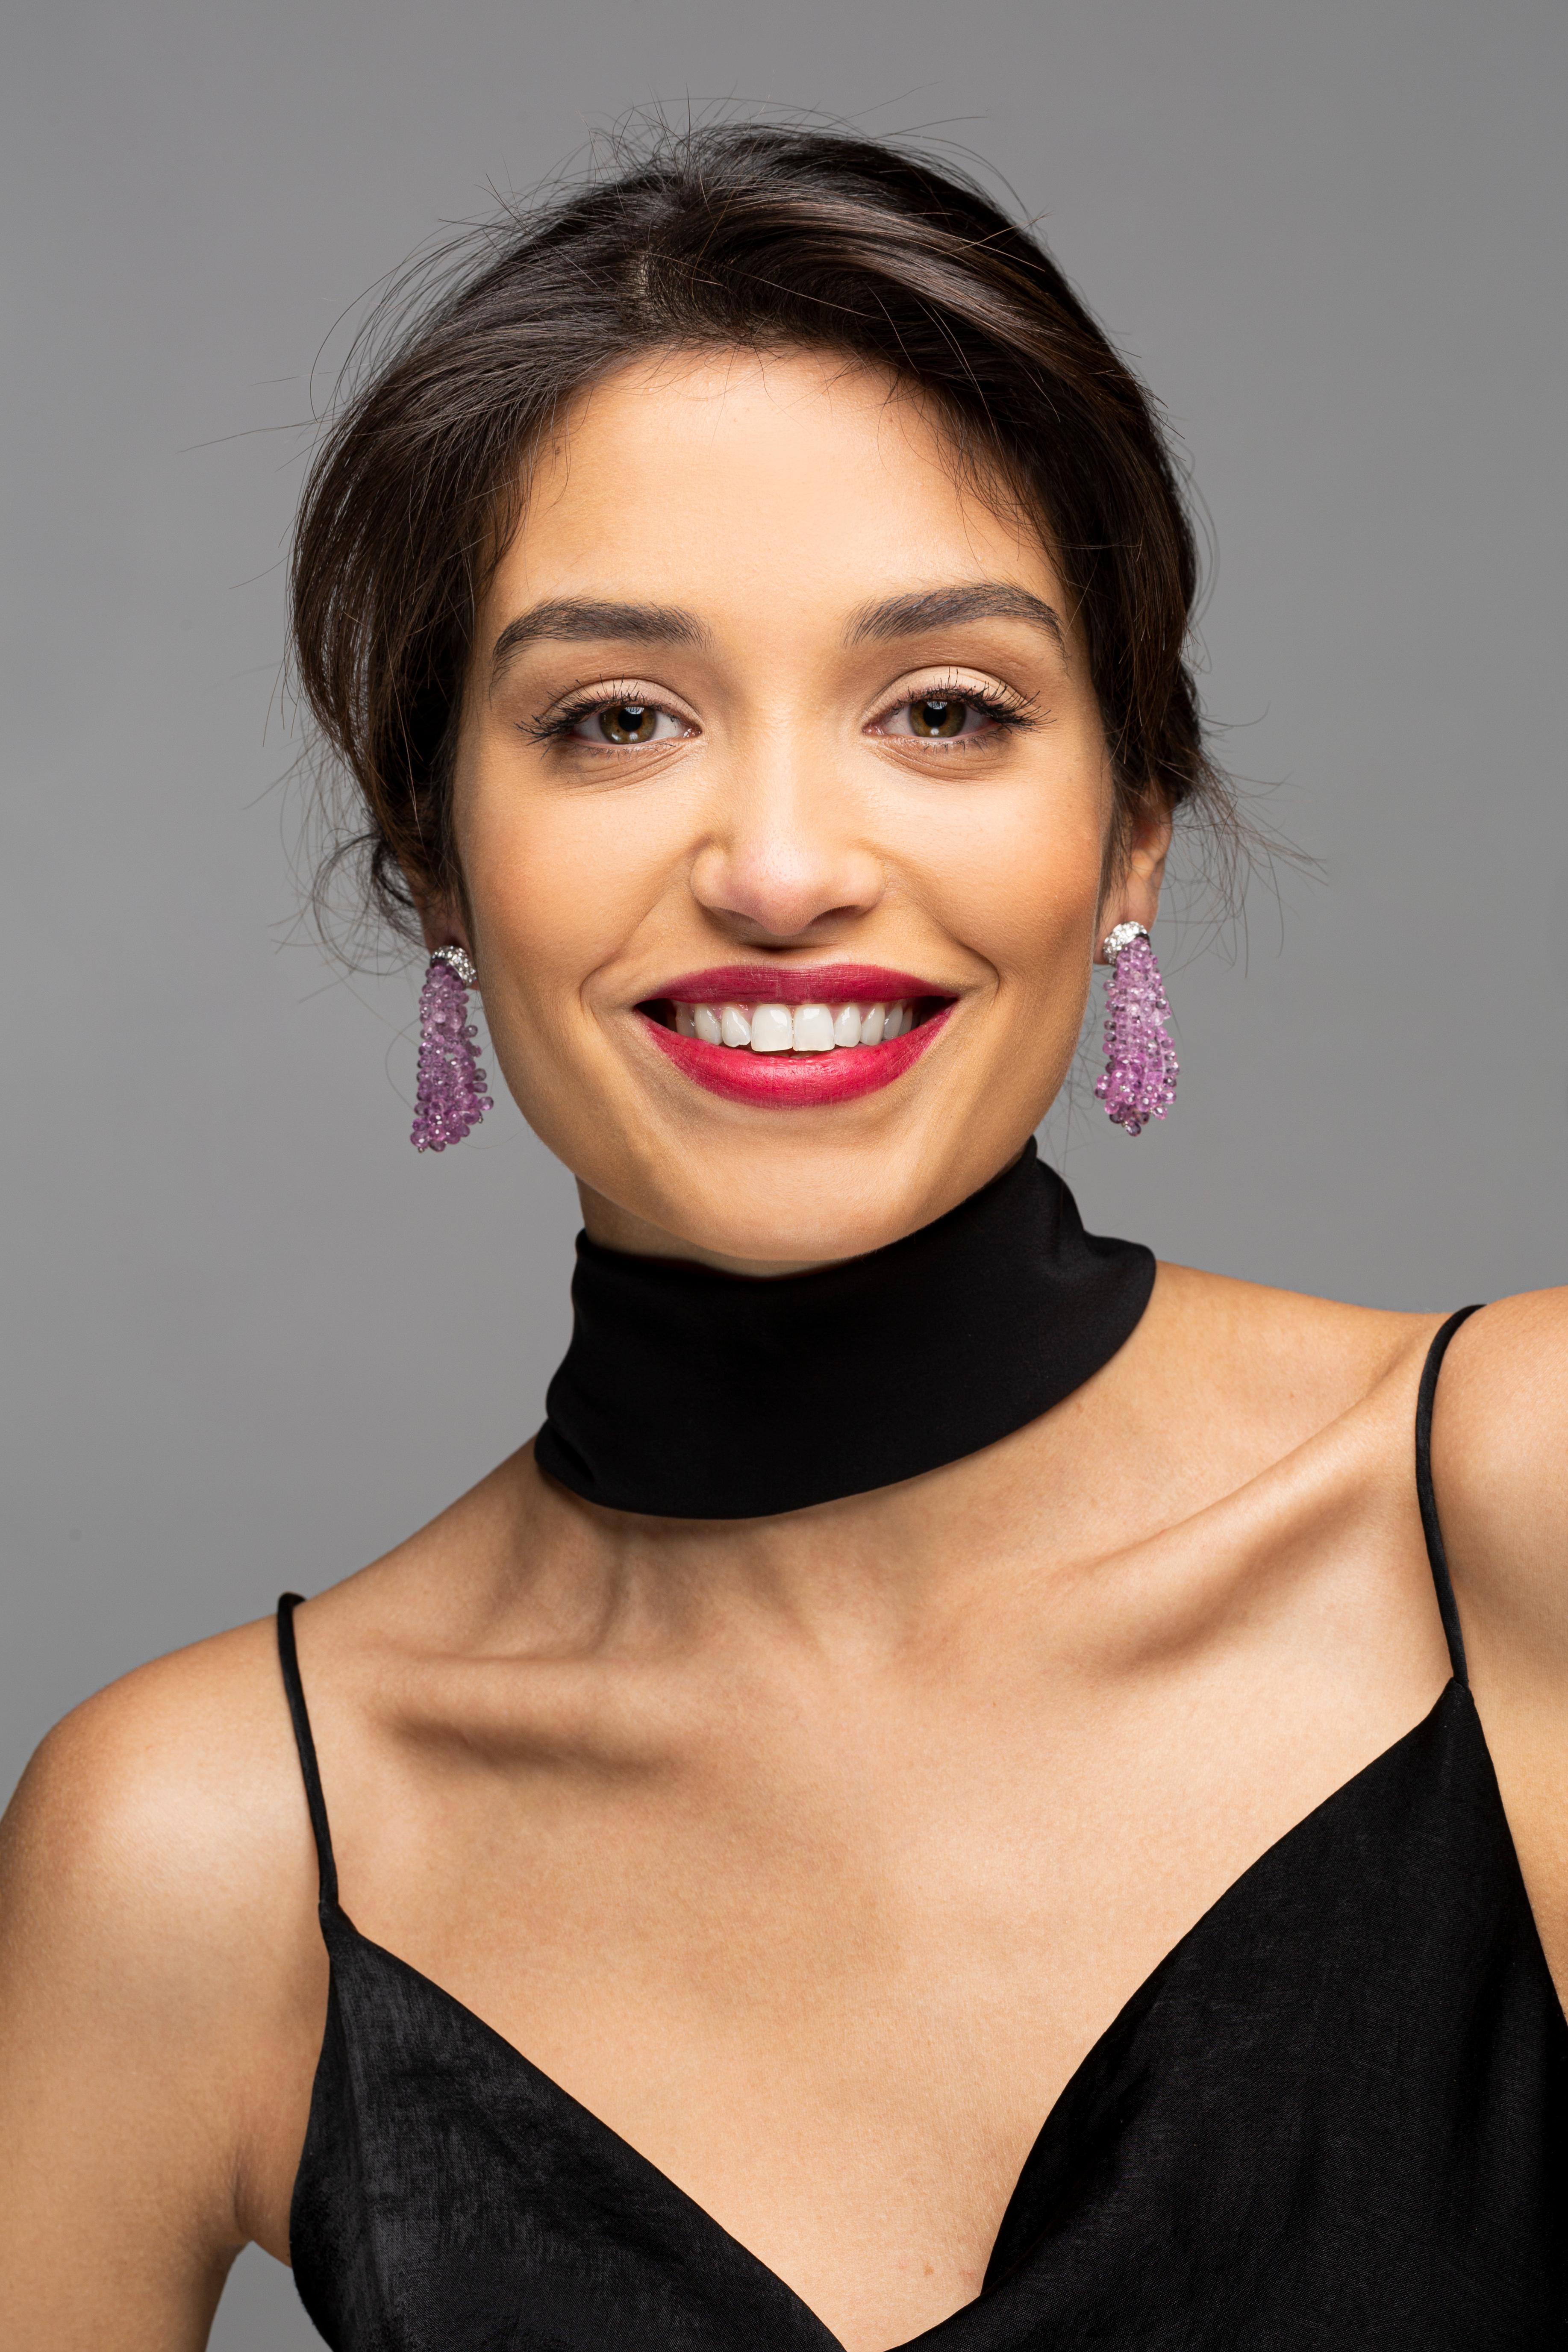 Alex Jona, hand crafted in Italy, pair of chandelier earrings featuring clusters of briolette cut graduated pink sapphires for a total weight of 61.85 carats, sustained by a fine 18 karat white gold mounting set with 1.52 carats of round-cut